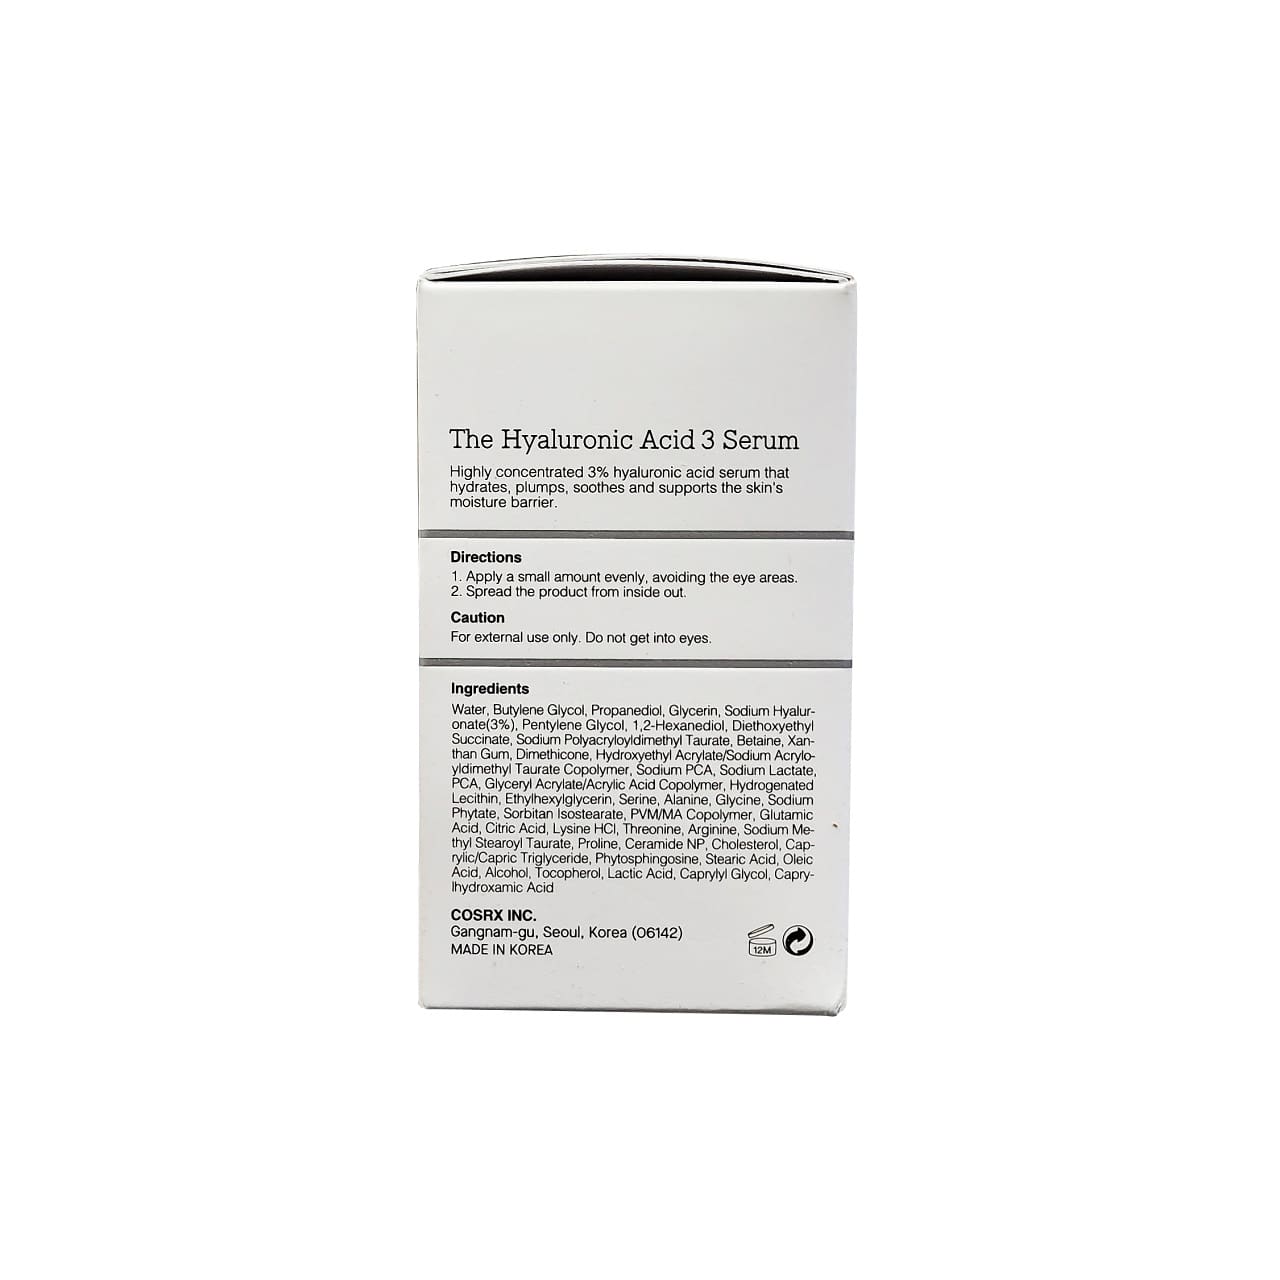 Description, directions, cautions, ingredients for COSRX The Hyaluronic Acid 3 (20 mL) in English